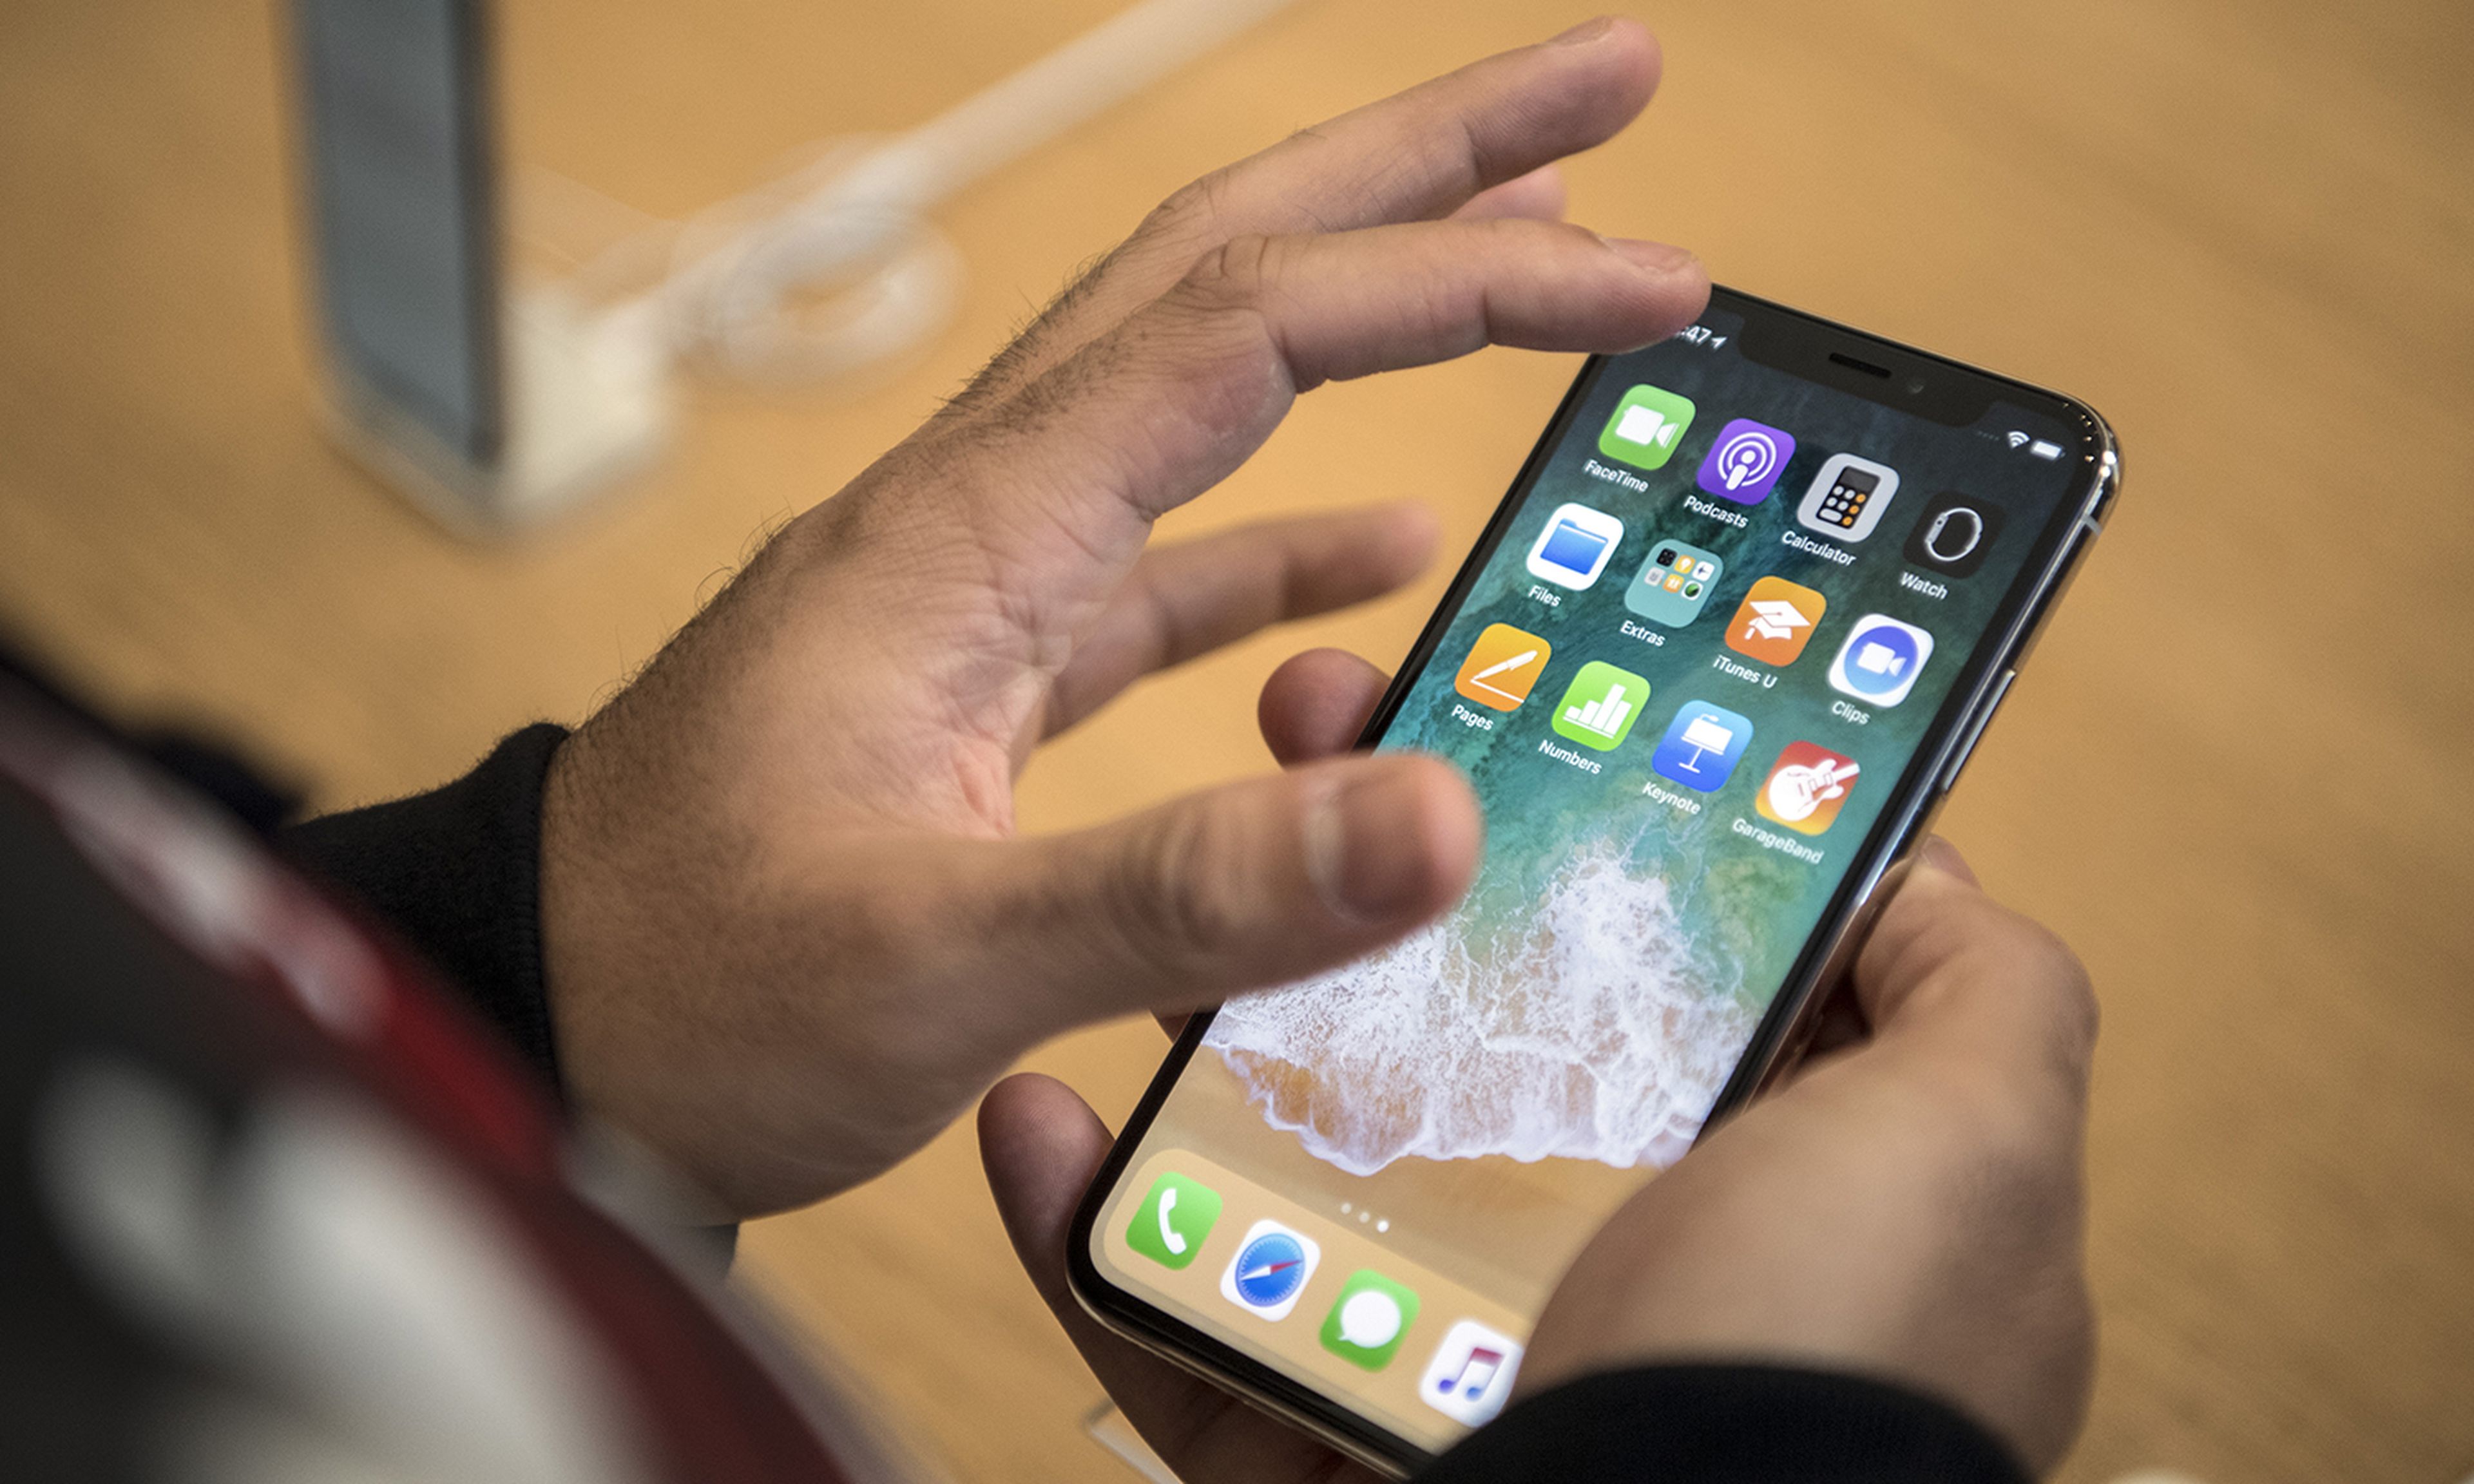 Nearly all organizations in a new survey said they had at least one API security incident in the past 12 months. Pictured: A customer views the iPhone X in the U.K. on Nov. 3, 2017, in London. (Photo by Carl Court/Getty Images)